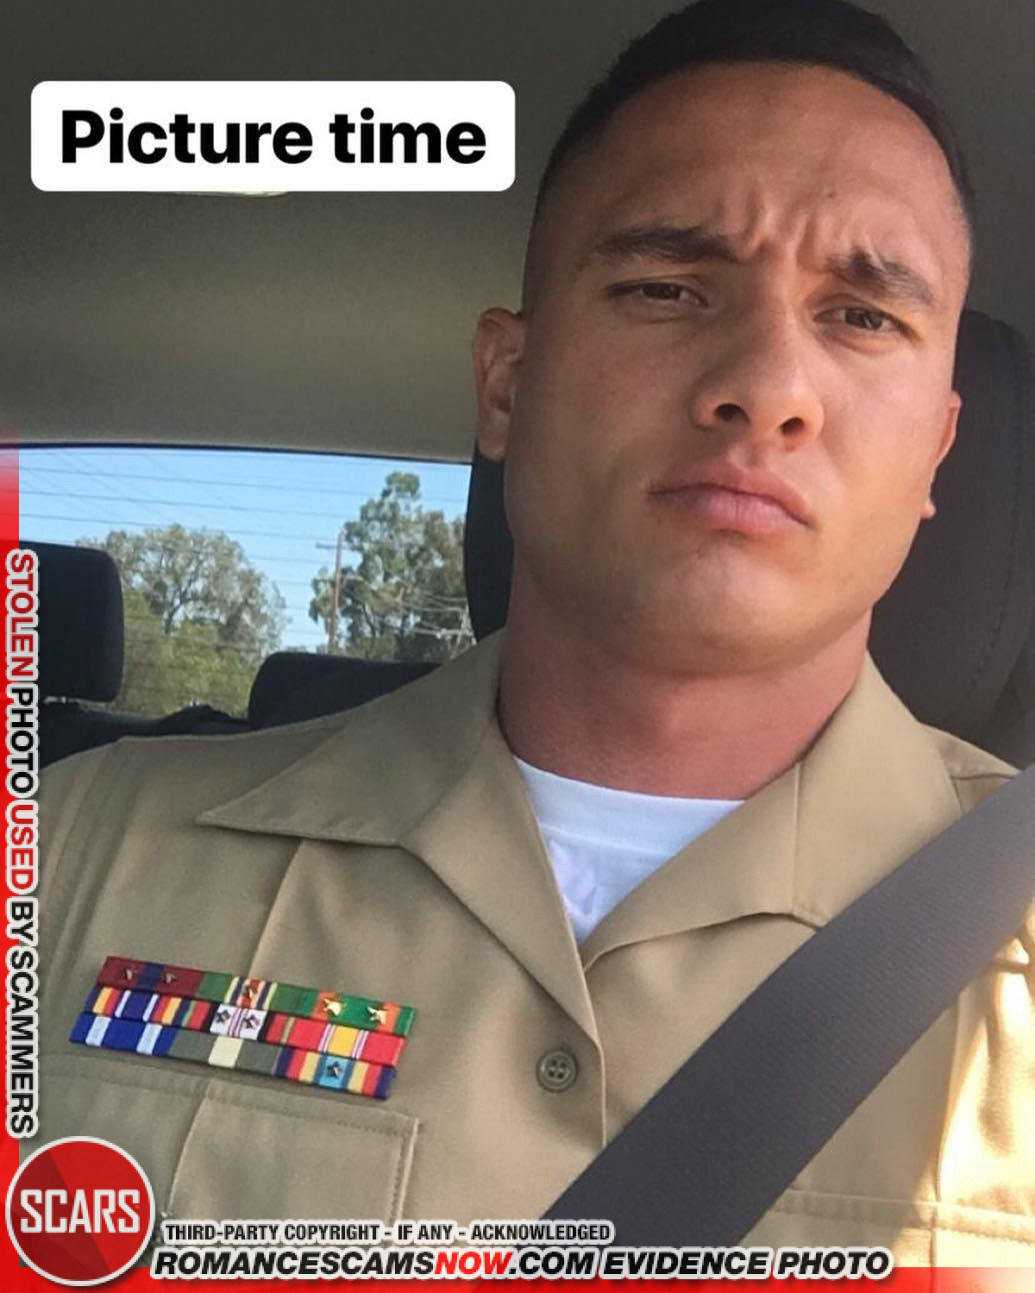 Stolen Photos Of Military/Soldiers/People In Uniform Used By Scammers